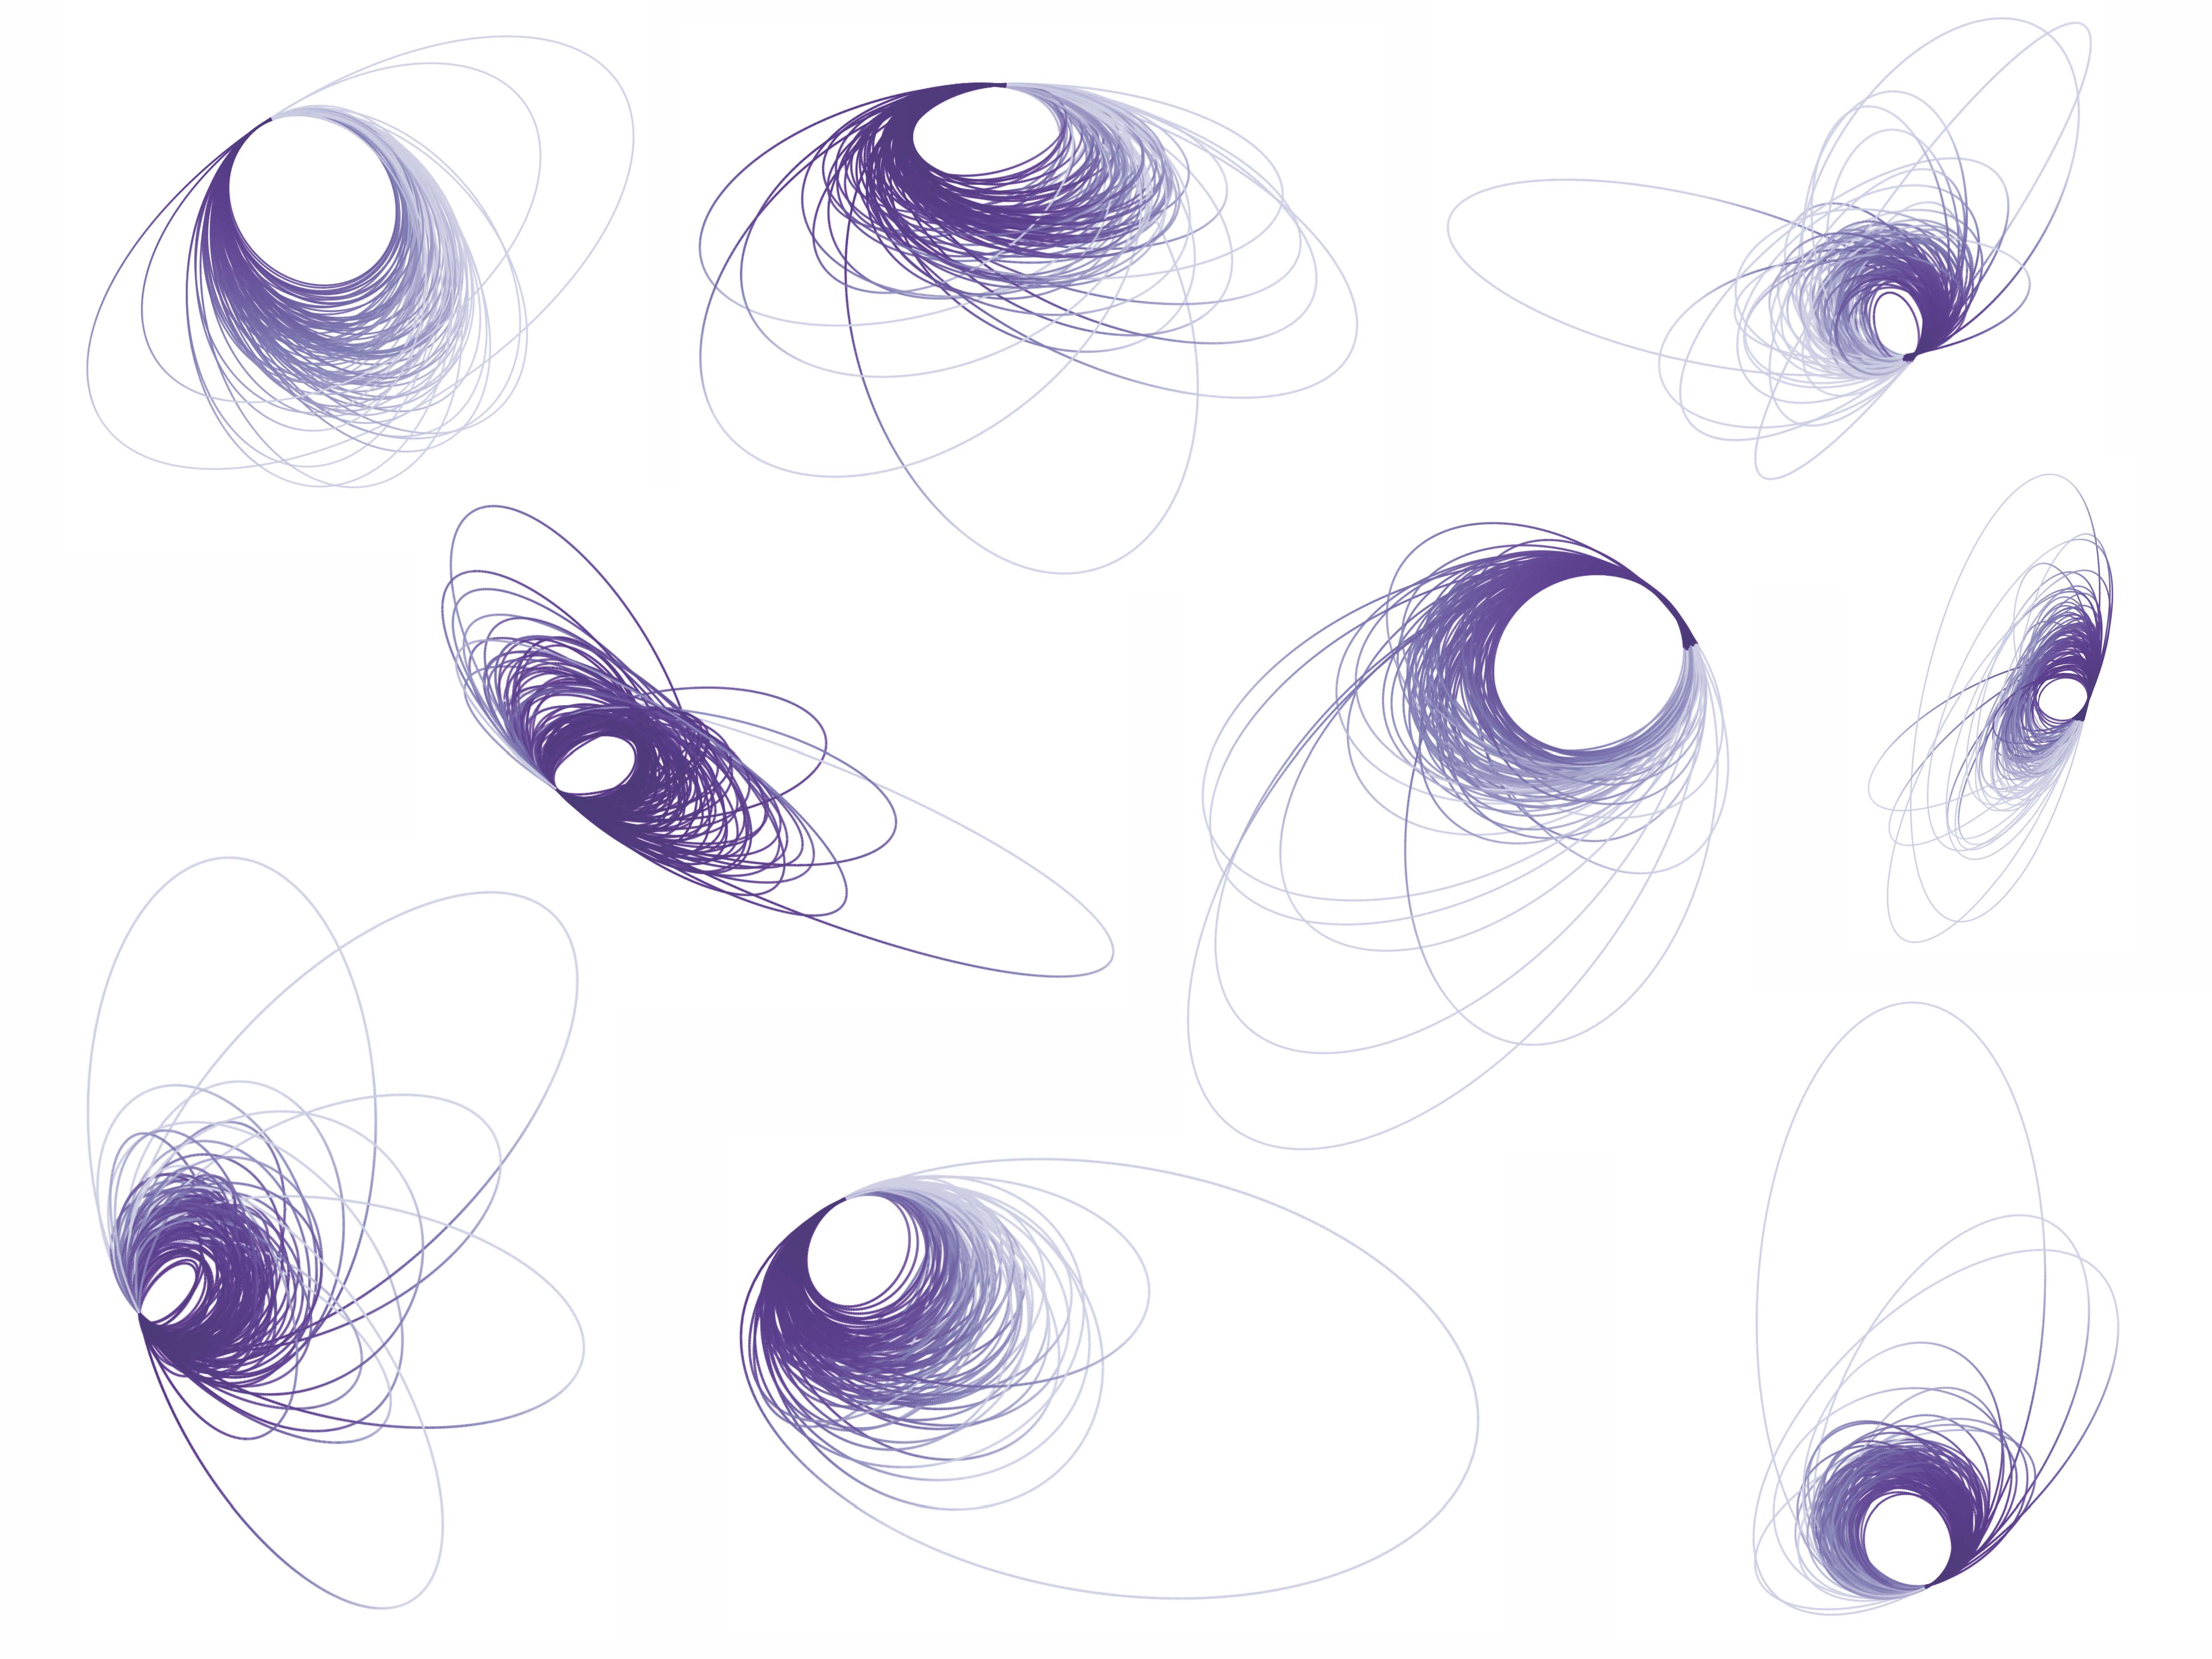 Nine different shaped circular and elliptical representations of orbits